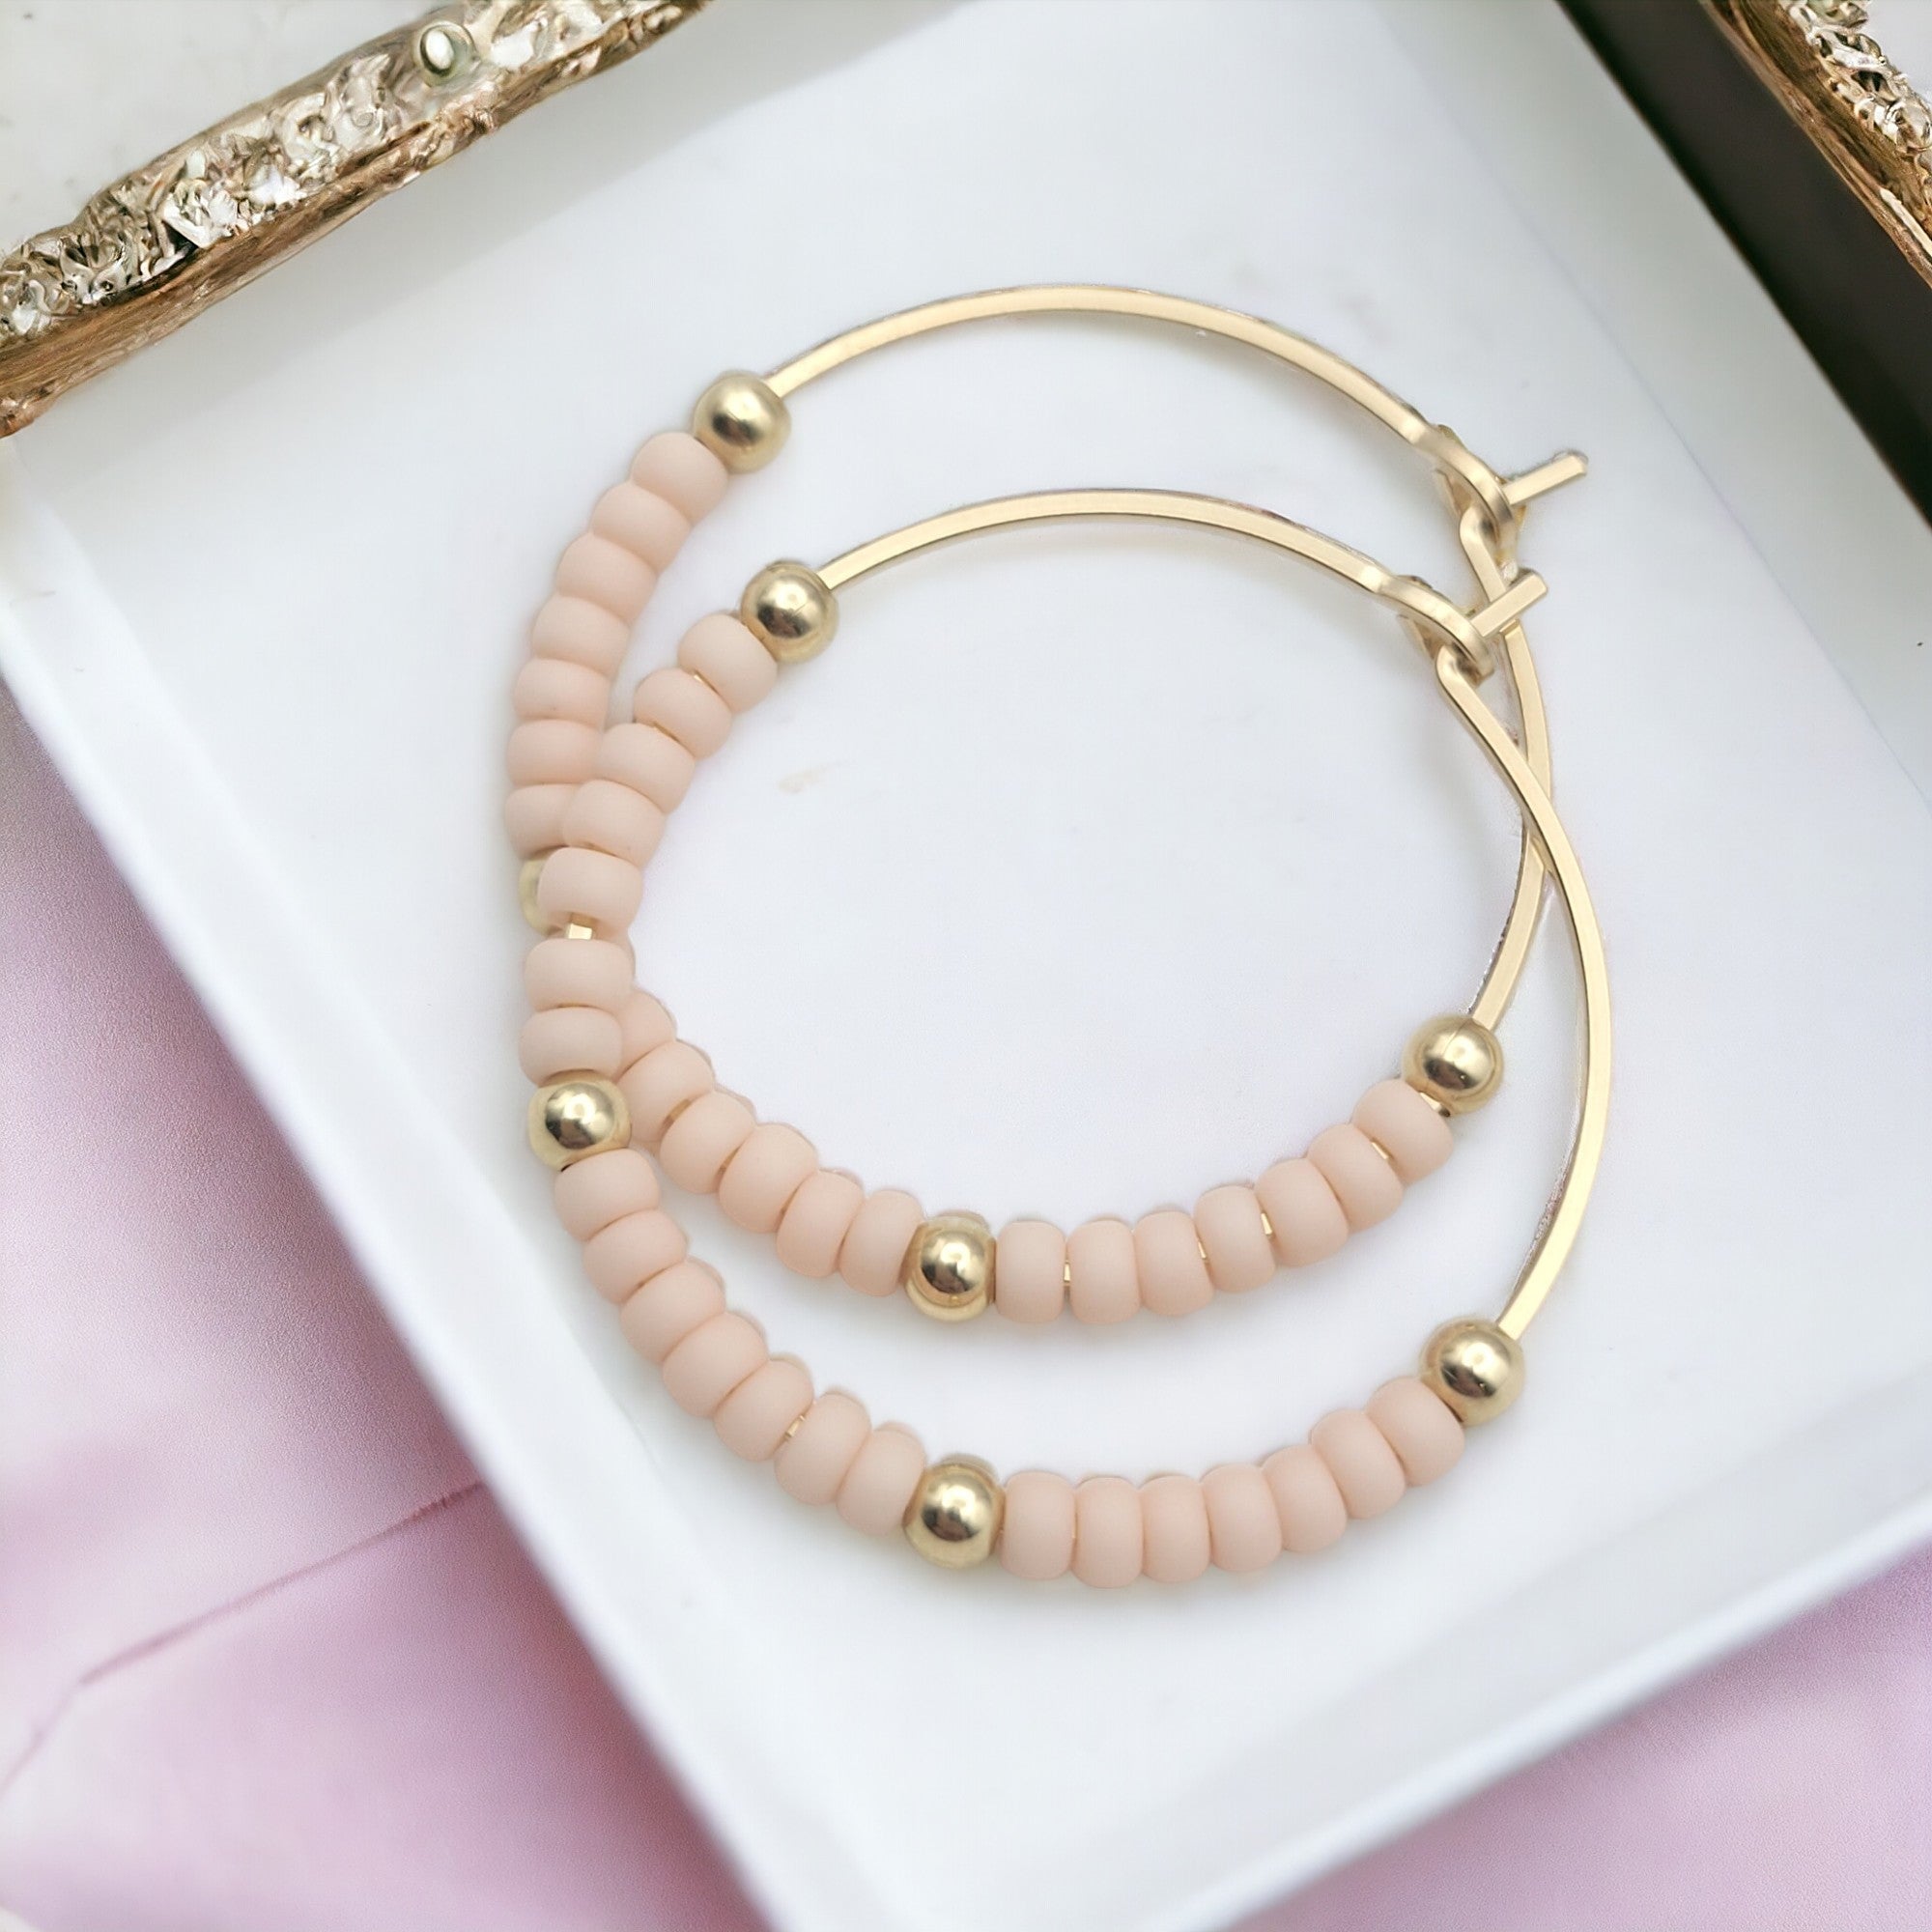 Boho - Gold Hoops with Pale Pink  Etsy   